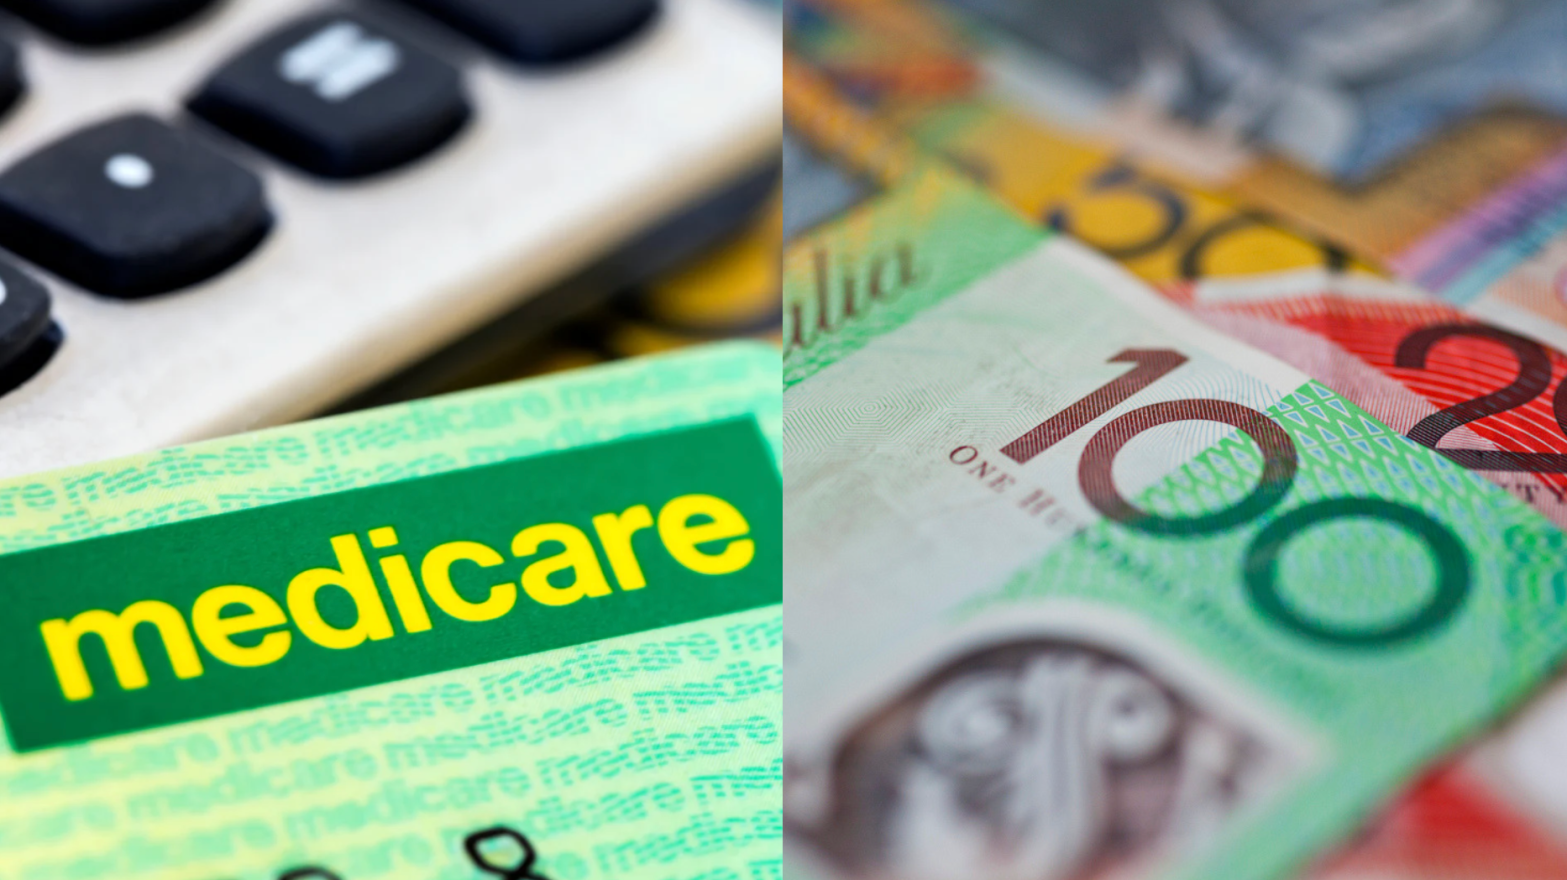 How to Tell if Your Medicare Details Have Been Set Up Wrong